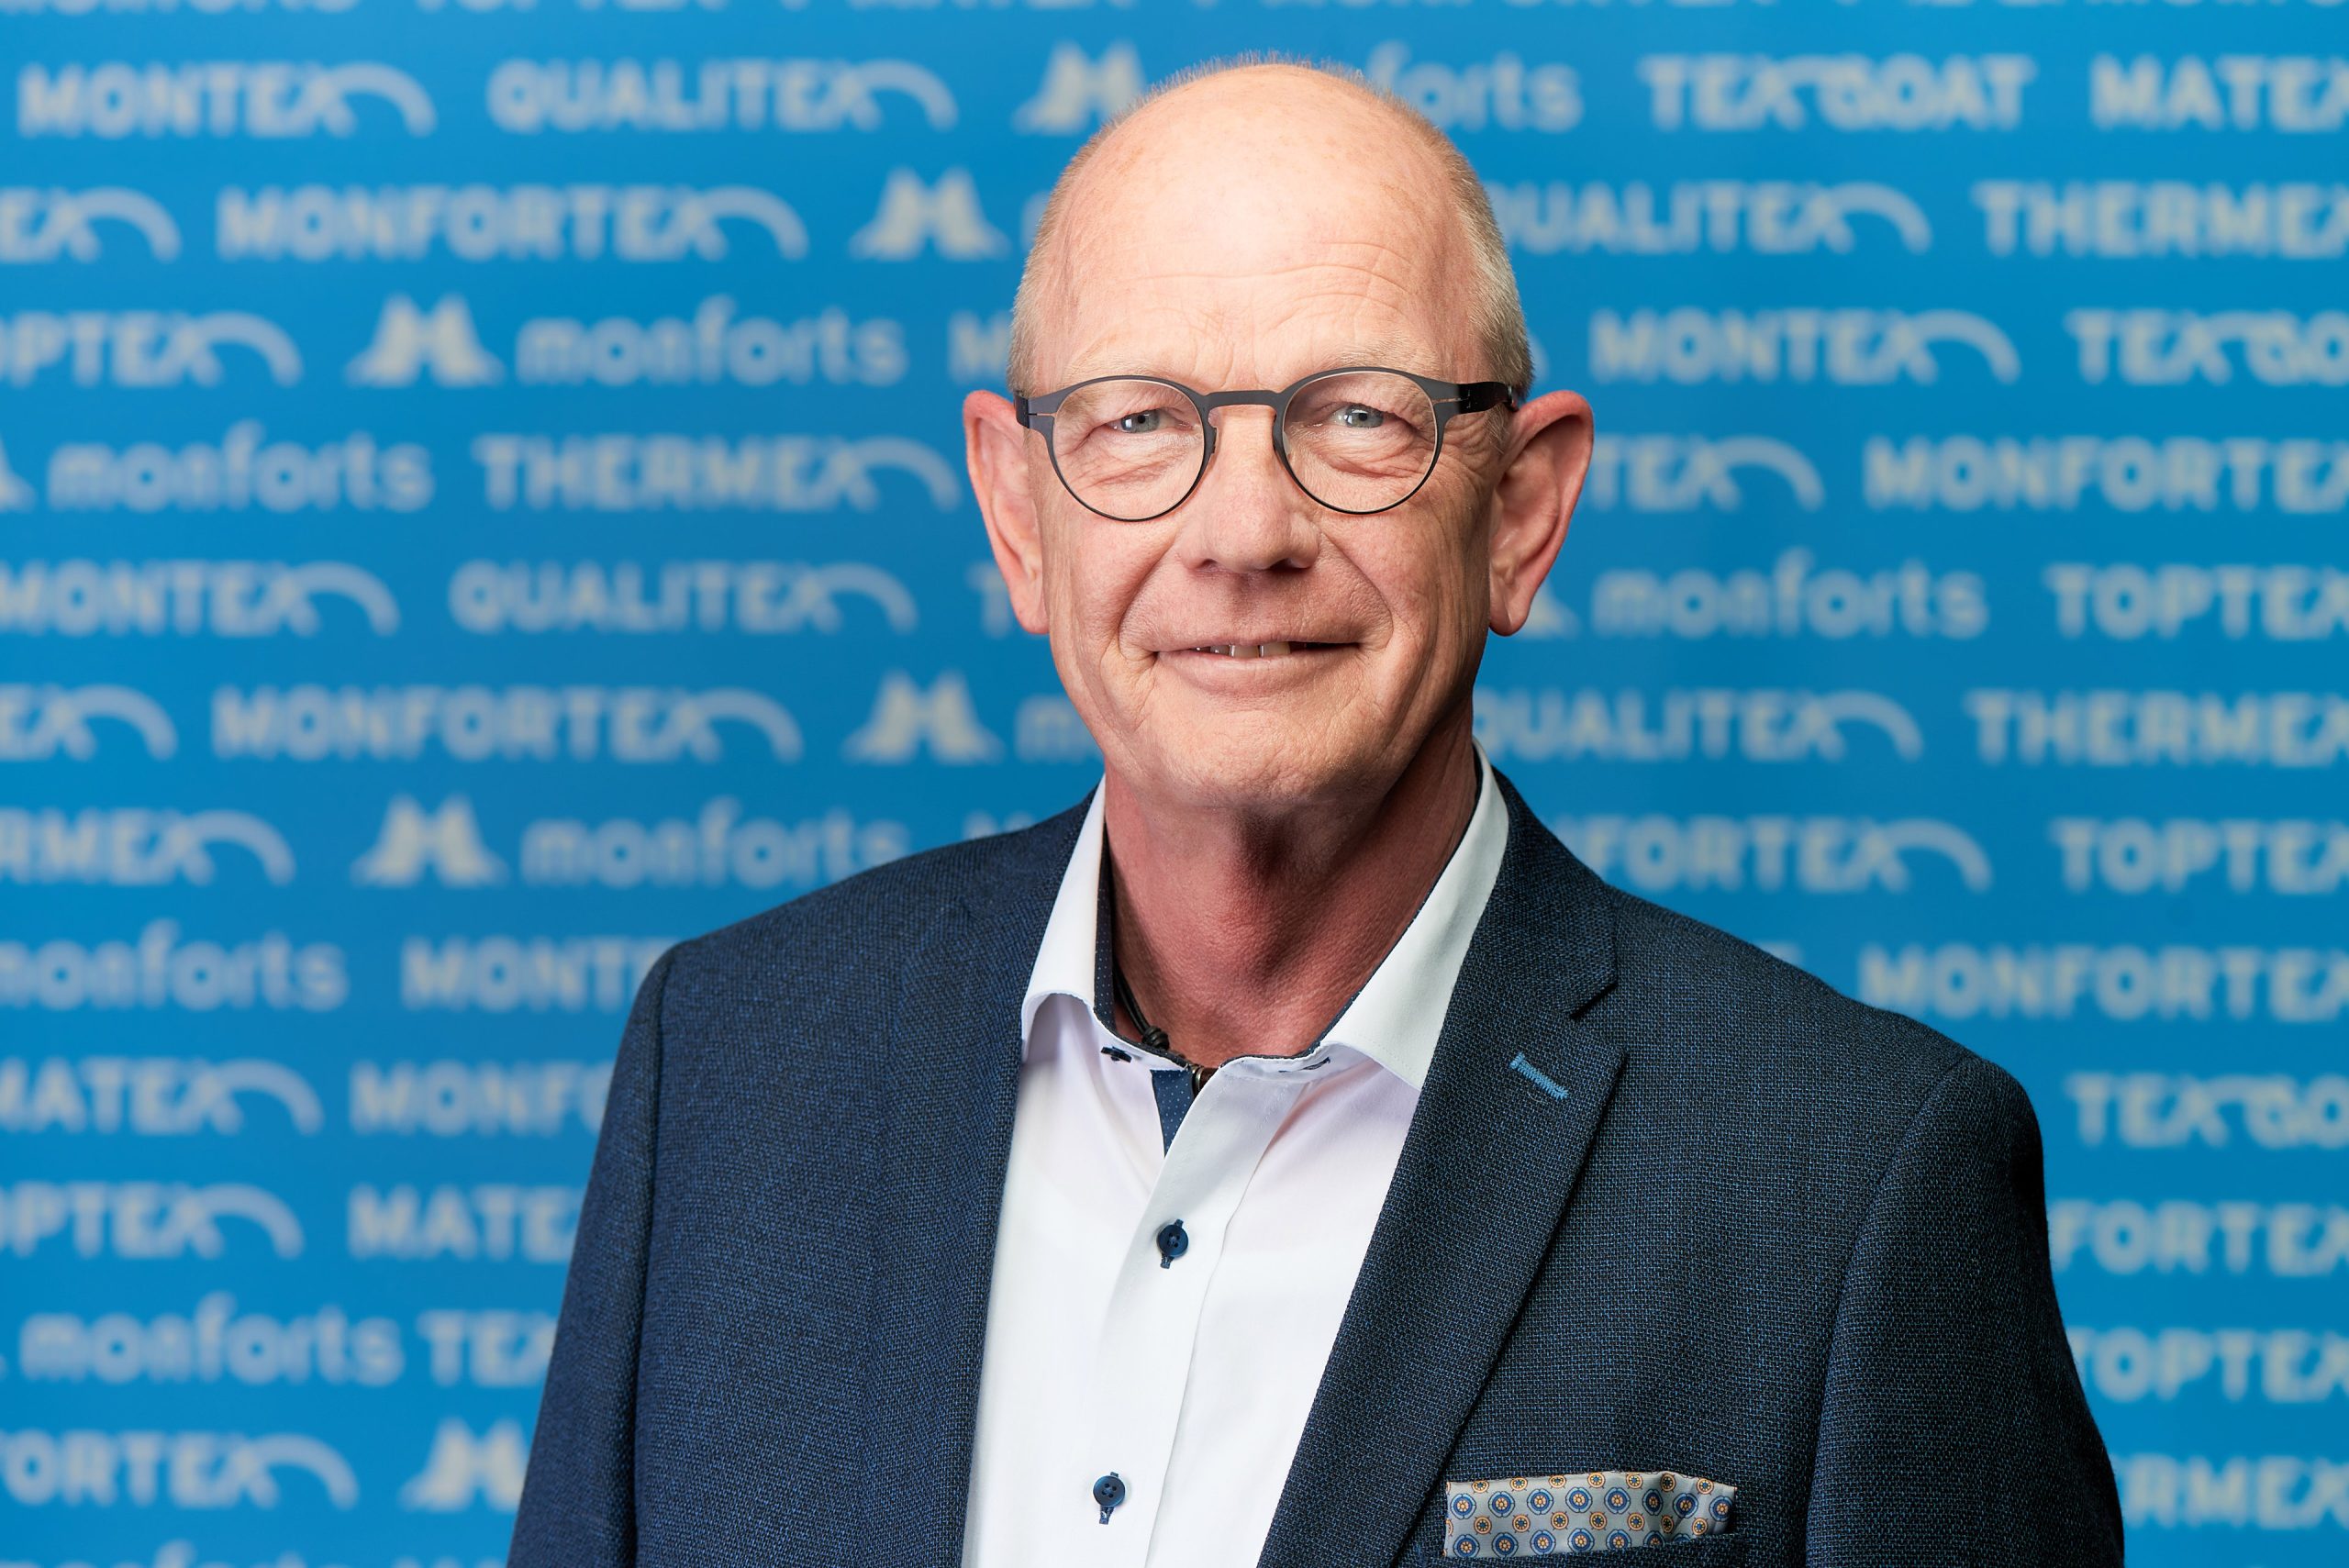 <strong>Monforts appoints Gunnar Meyer as the new Managing Director</strong>